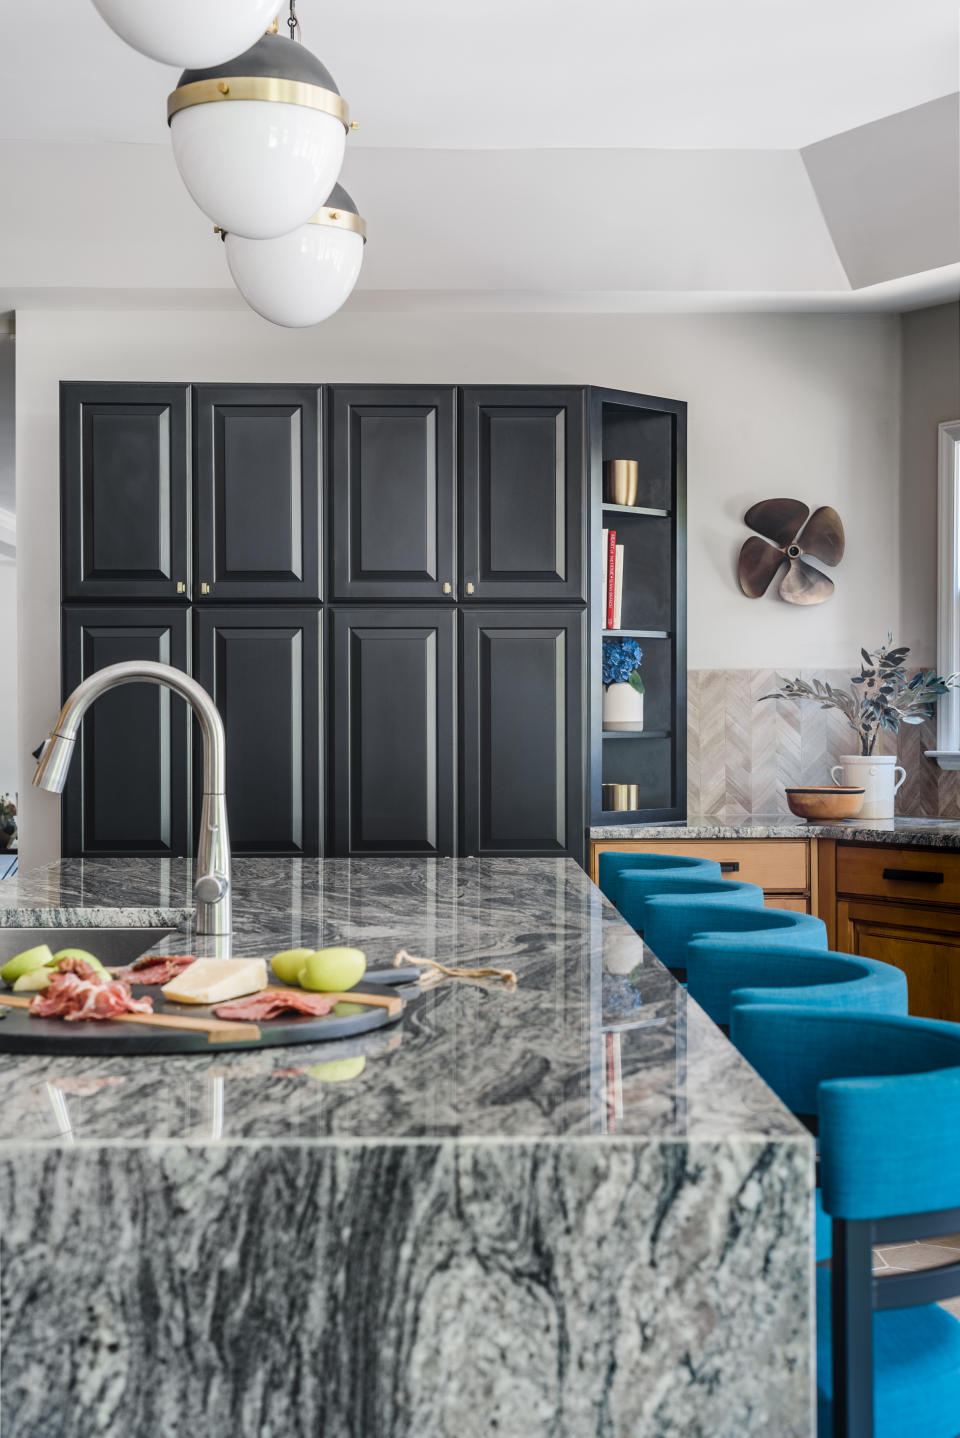 <p> When&#xA0;designing a kitchen, use a combination of colors, materials and finishes to create a characterful look &#x2013; but just as you would in a living room, limit your palette to one main color and two accents. In this kitchen, interior designer&#xA0;Brenna Morgan&#xA0;used grey as the predominant shade in the marble-look island, with black painted cabinets as an accent next to warmer, stained wood cabinetry and bright turquoise&#xA0;bar stools in this lakeside retreat. </p>